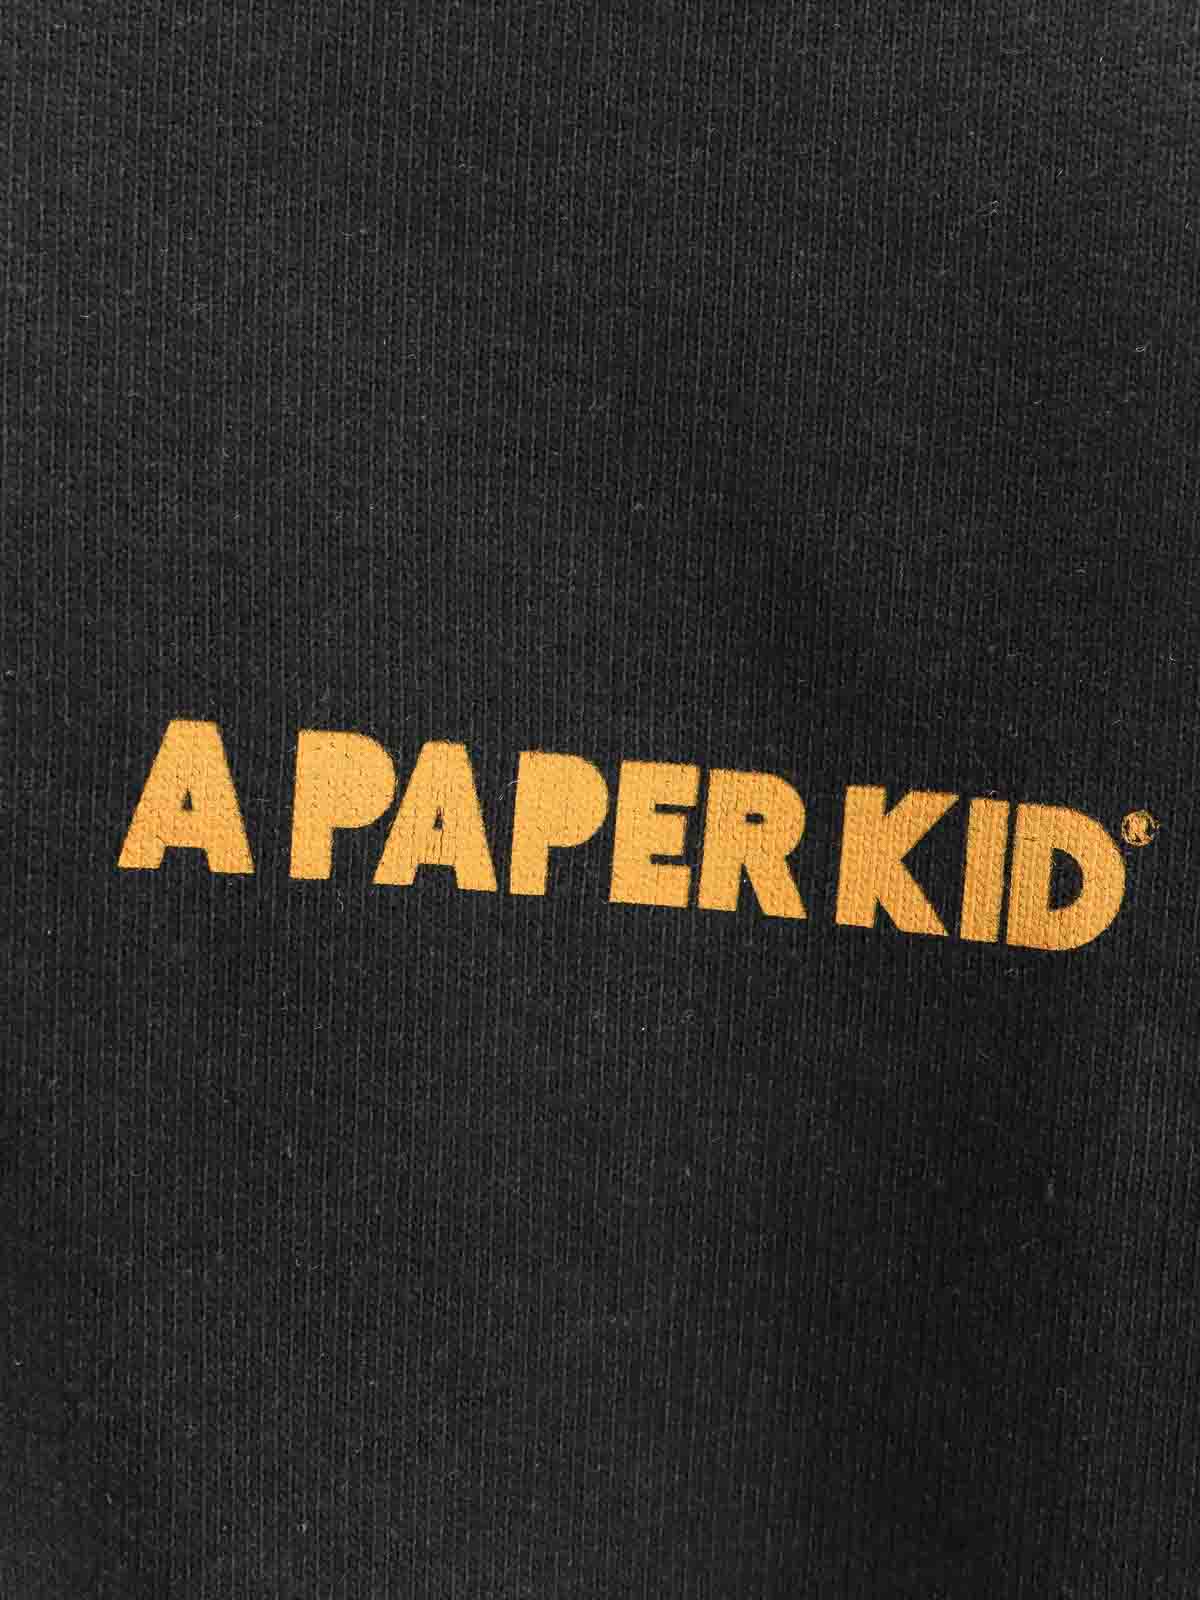 Shop A Paper Kid Cotton Sweatshirt With Frontal Logo In Black